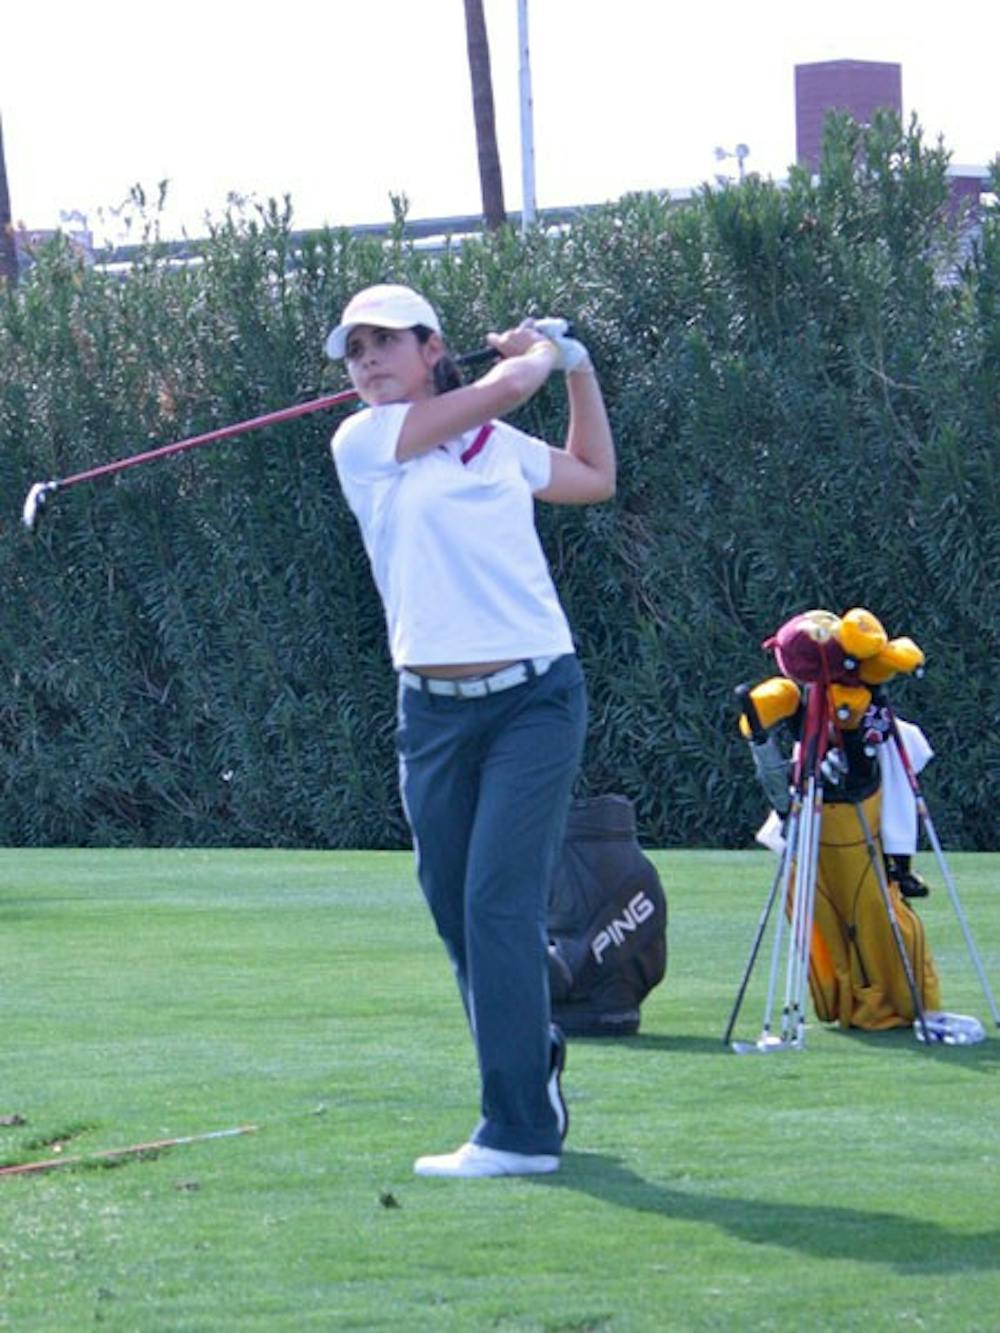 NOT UP TO PAR: ASU senior golfer Juliana Murcia had an uncharacteristically tough tournament at the Bruin/Wave Invitational in Santa Clarita, Calif. Still, the No. 1 Sun Devils took second place behind USC. (Photo by Nick Kosmider)